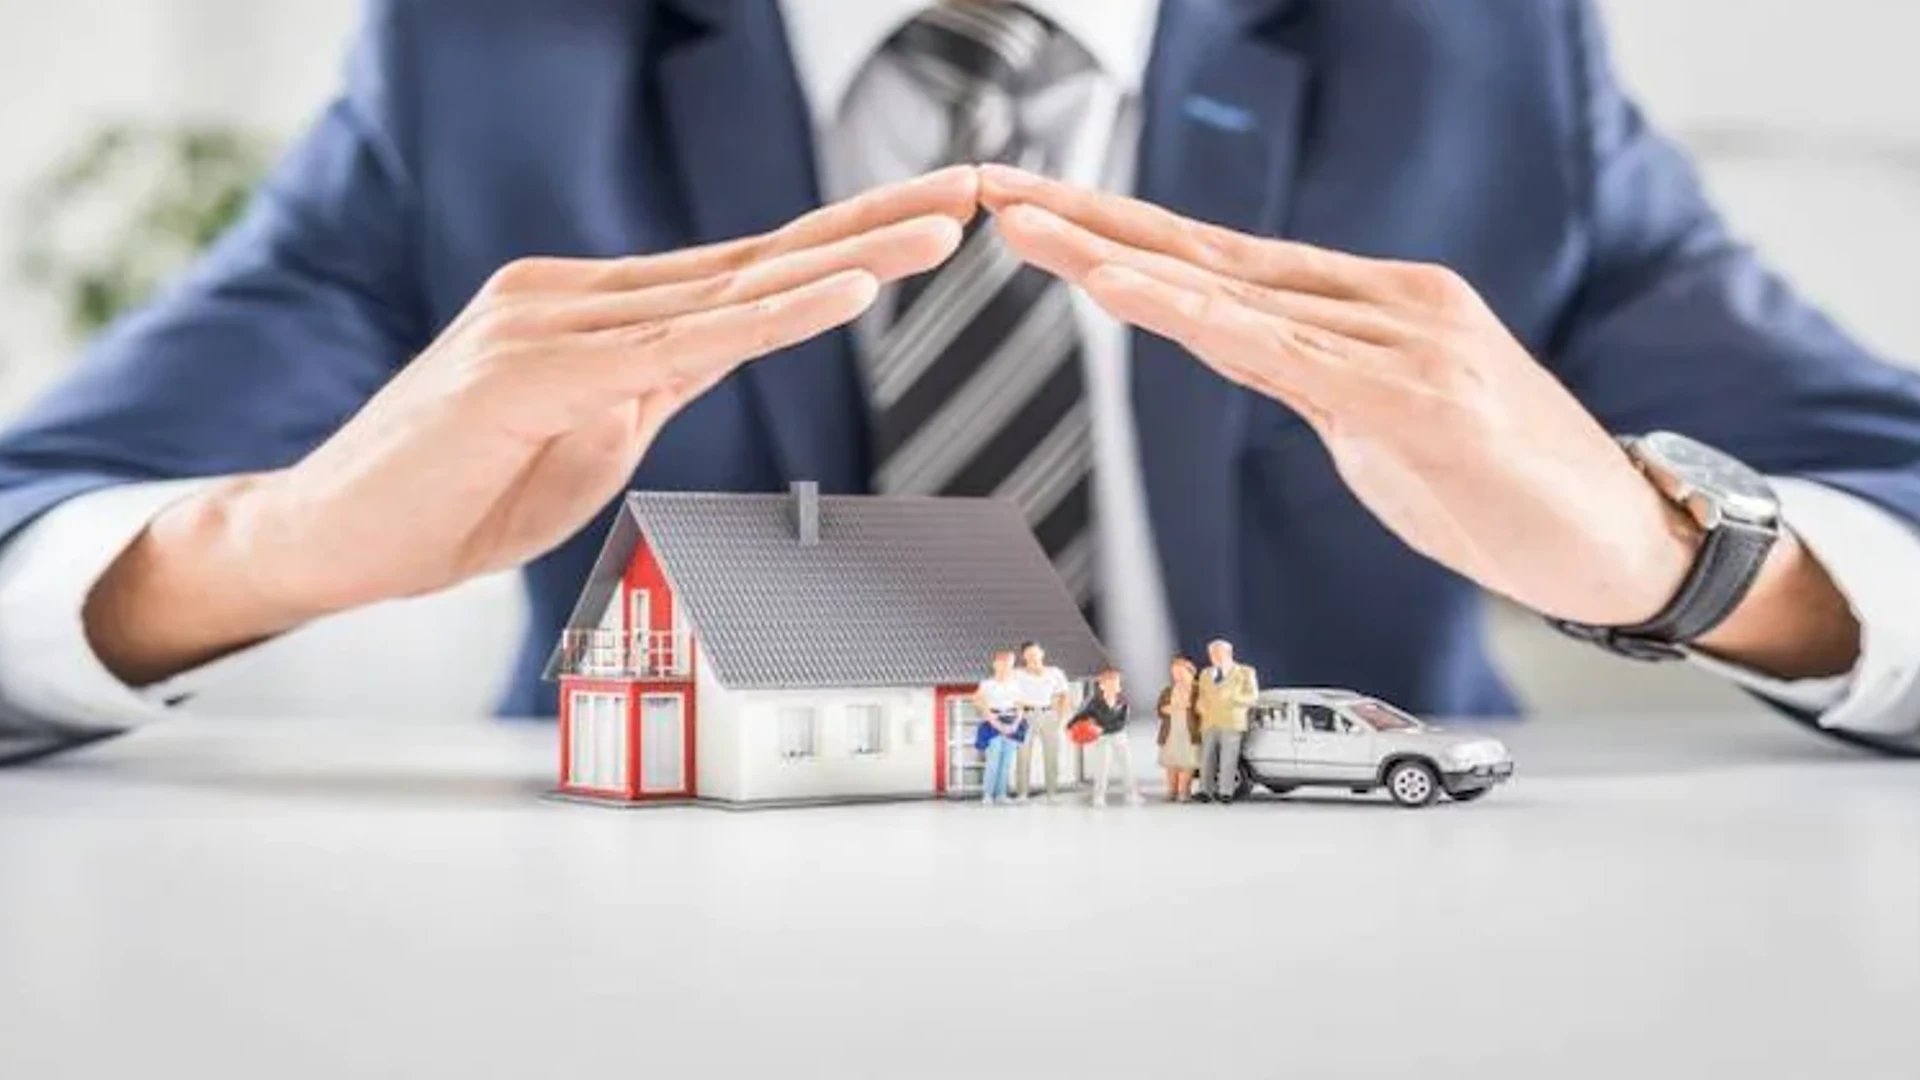 Insurance: Tips for Buying Homeowners Insurance